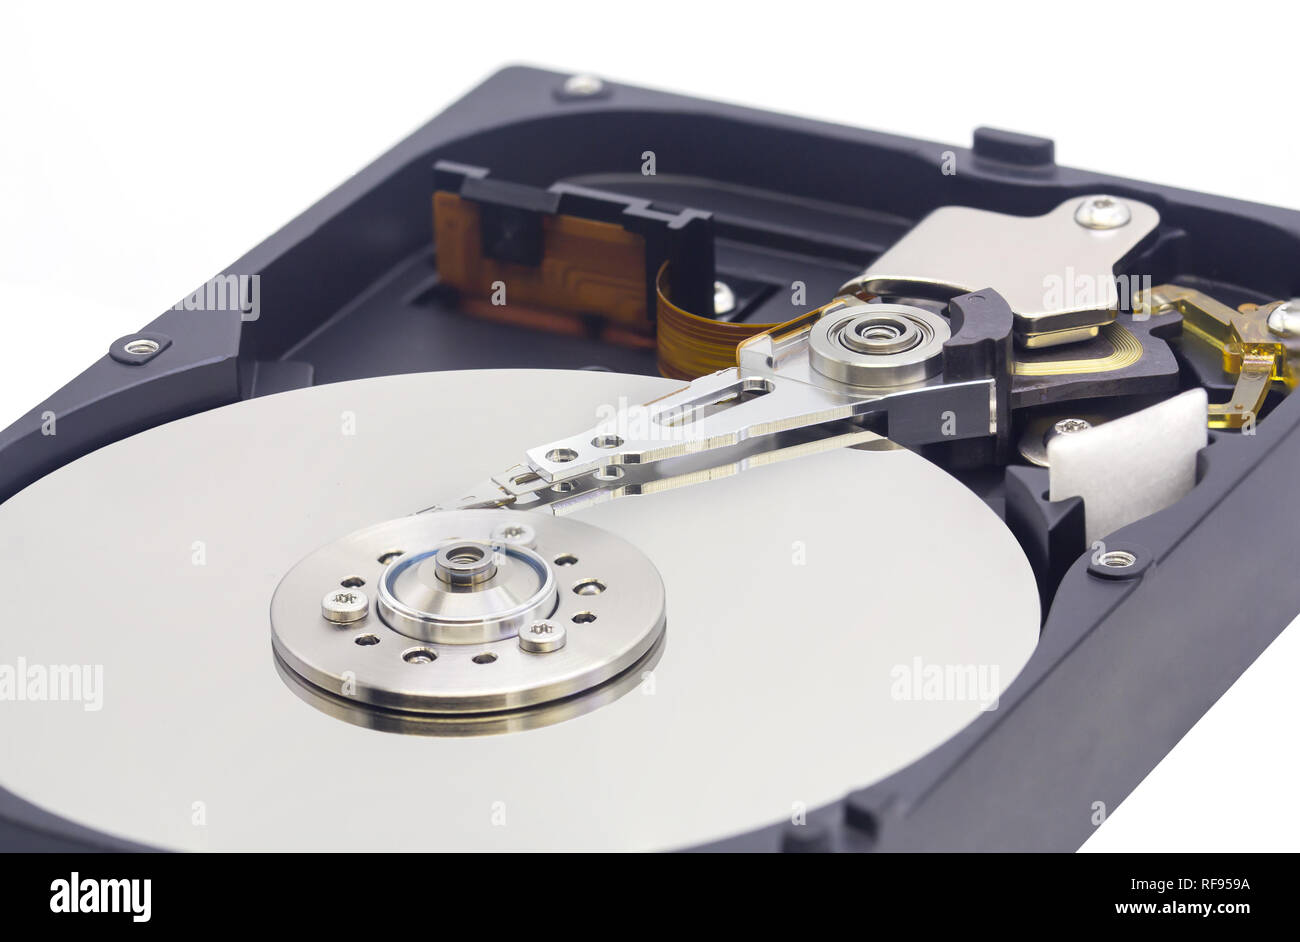 HDD Hard disk drive isolated on white background Stock Photo